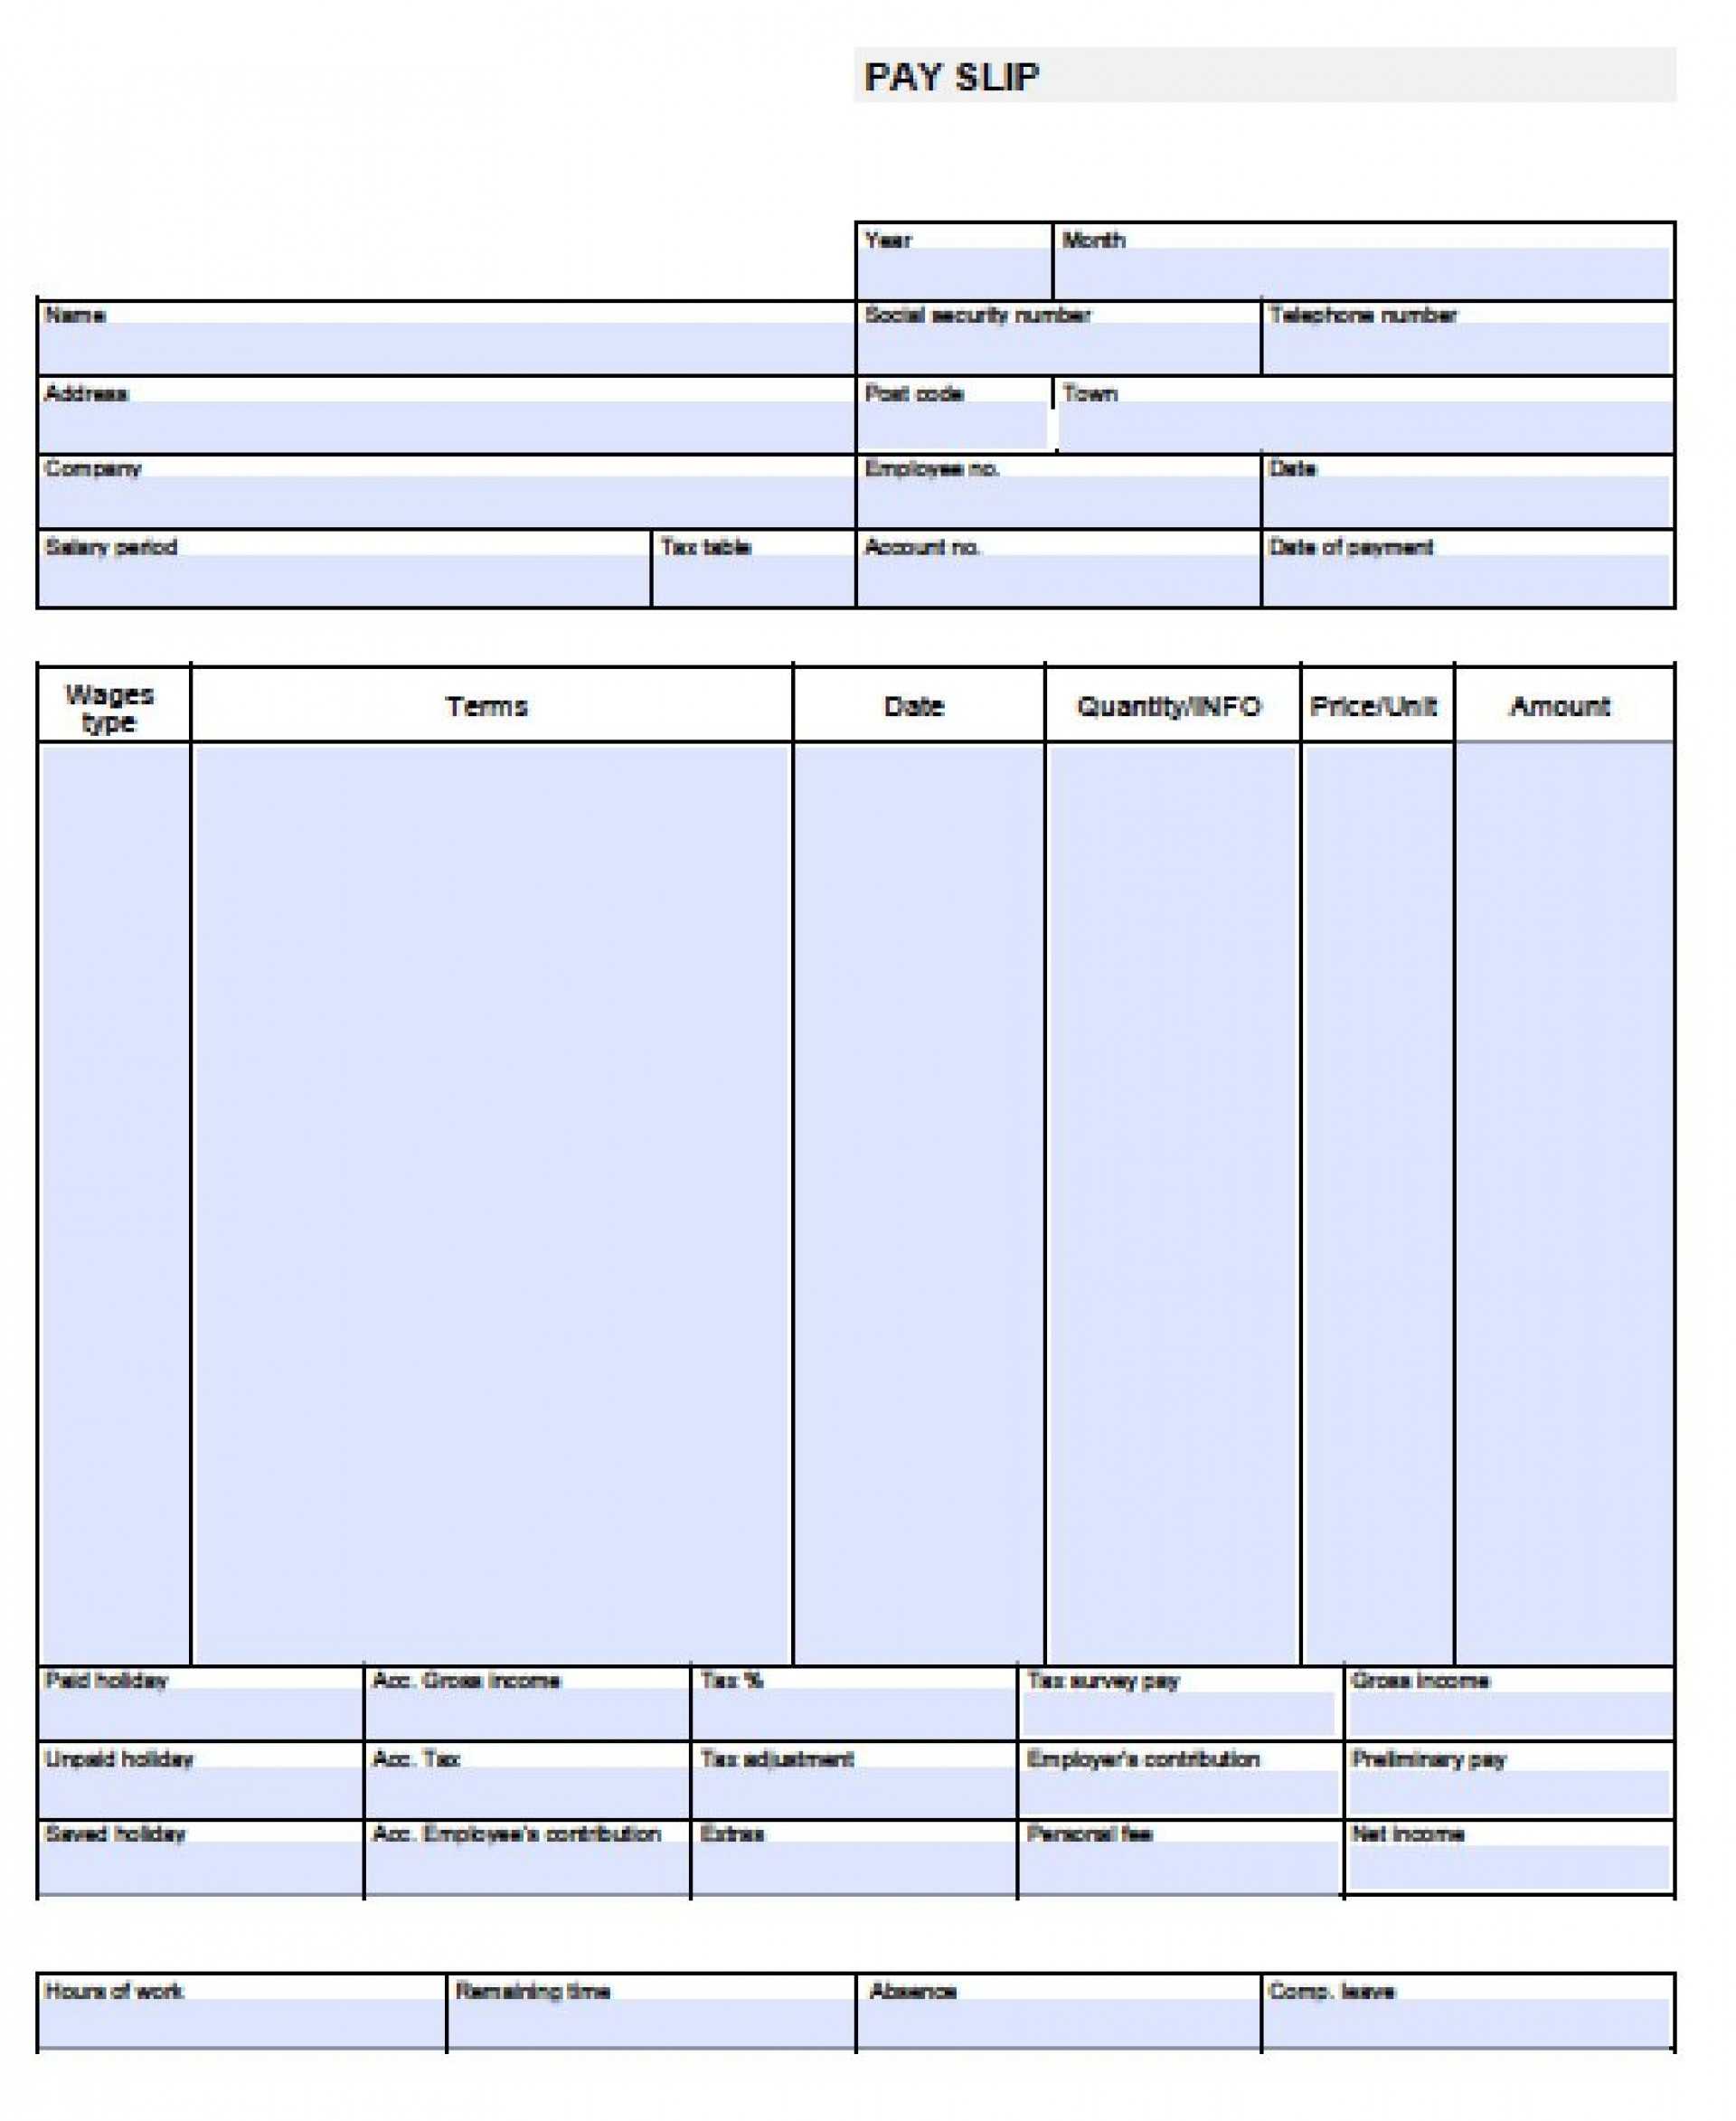 Surprising Blank Check Templates For Excel Template Ideas Within Blank Check Templates For Microsoft Word